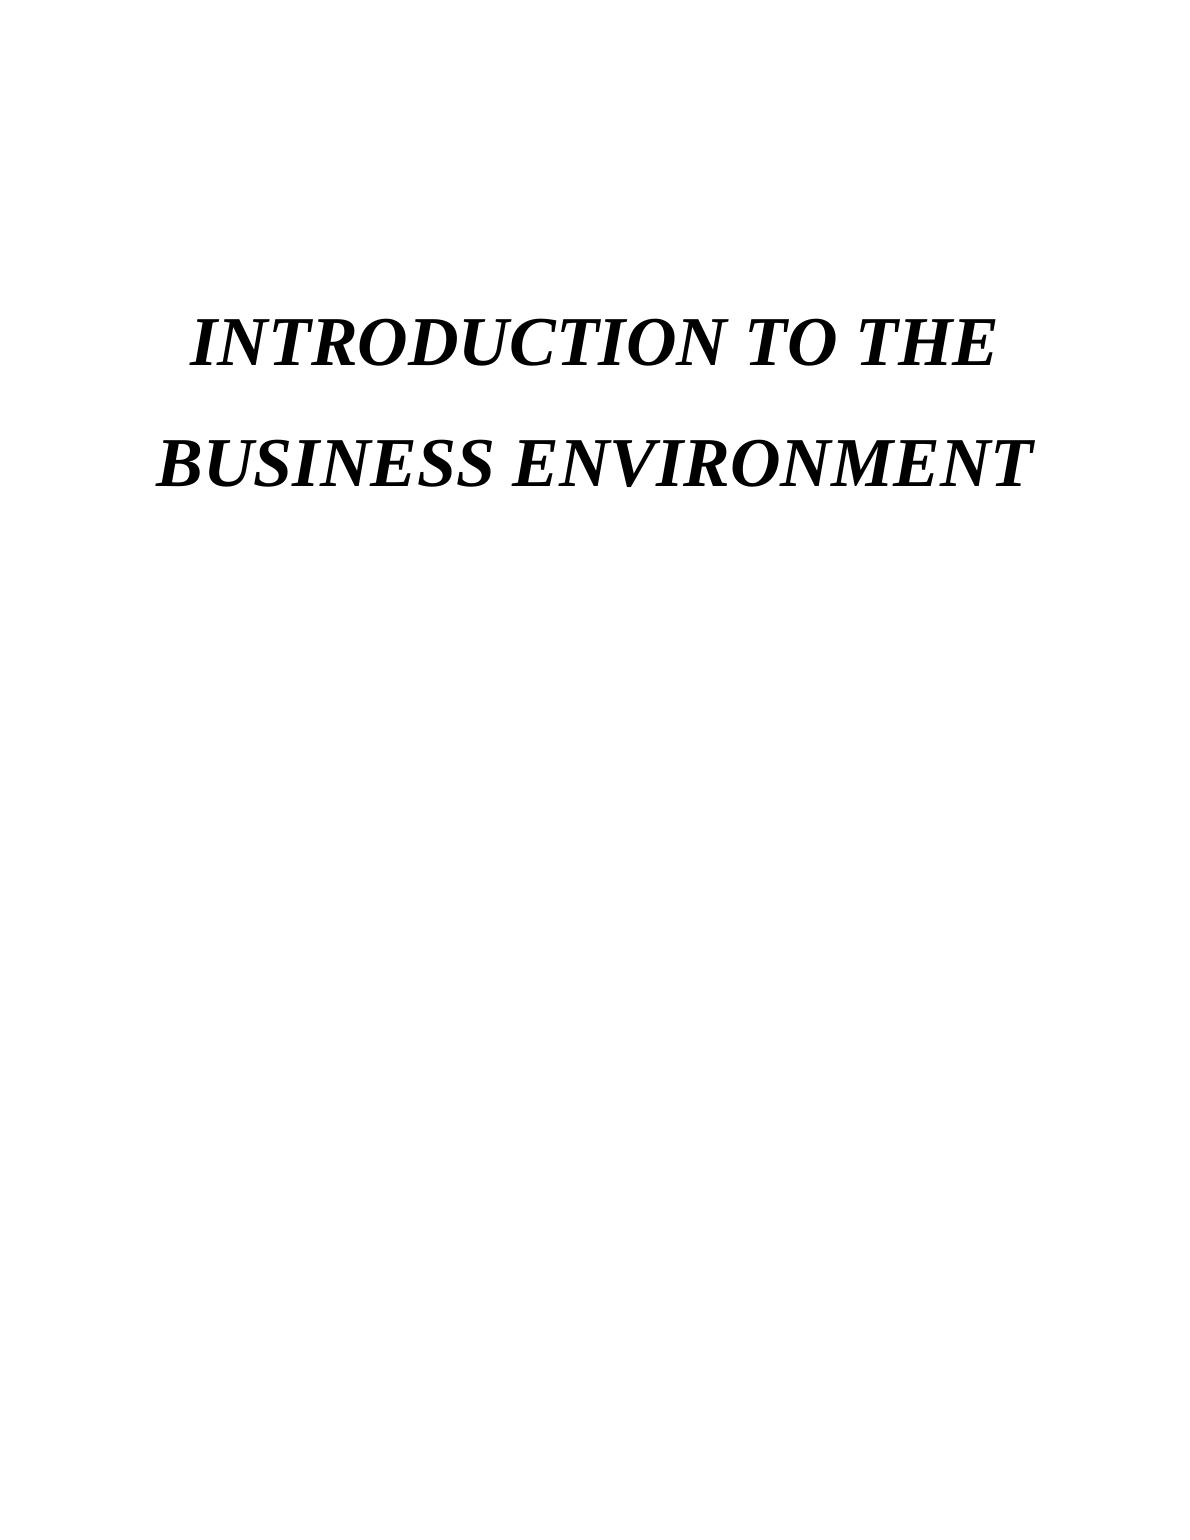 Introduction to Business Environment : British Petroleum_1